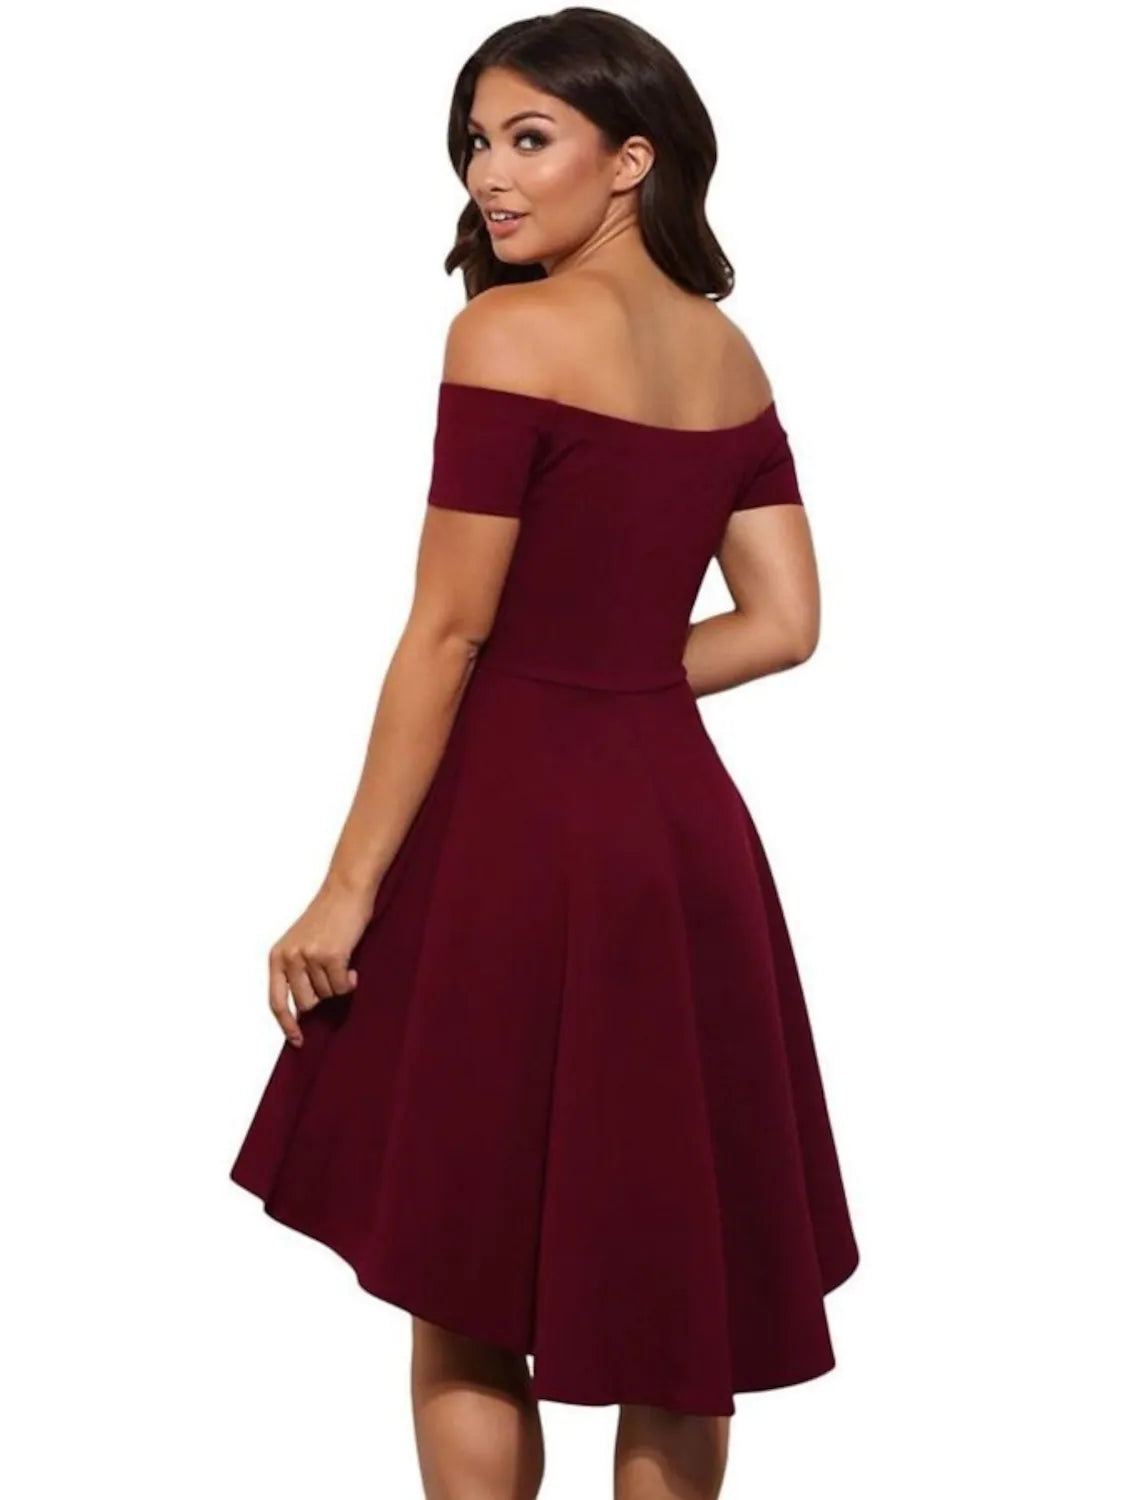 Homecoming Party Wear Dress Off Shoulder Short Sleeve Mini Stretch Satin